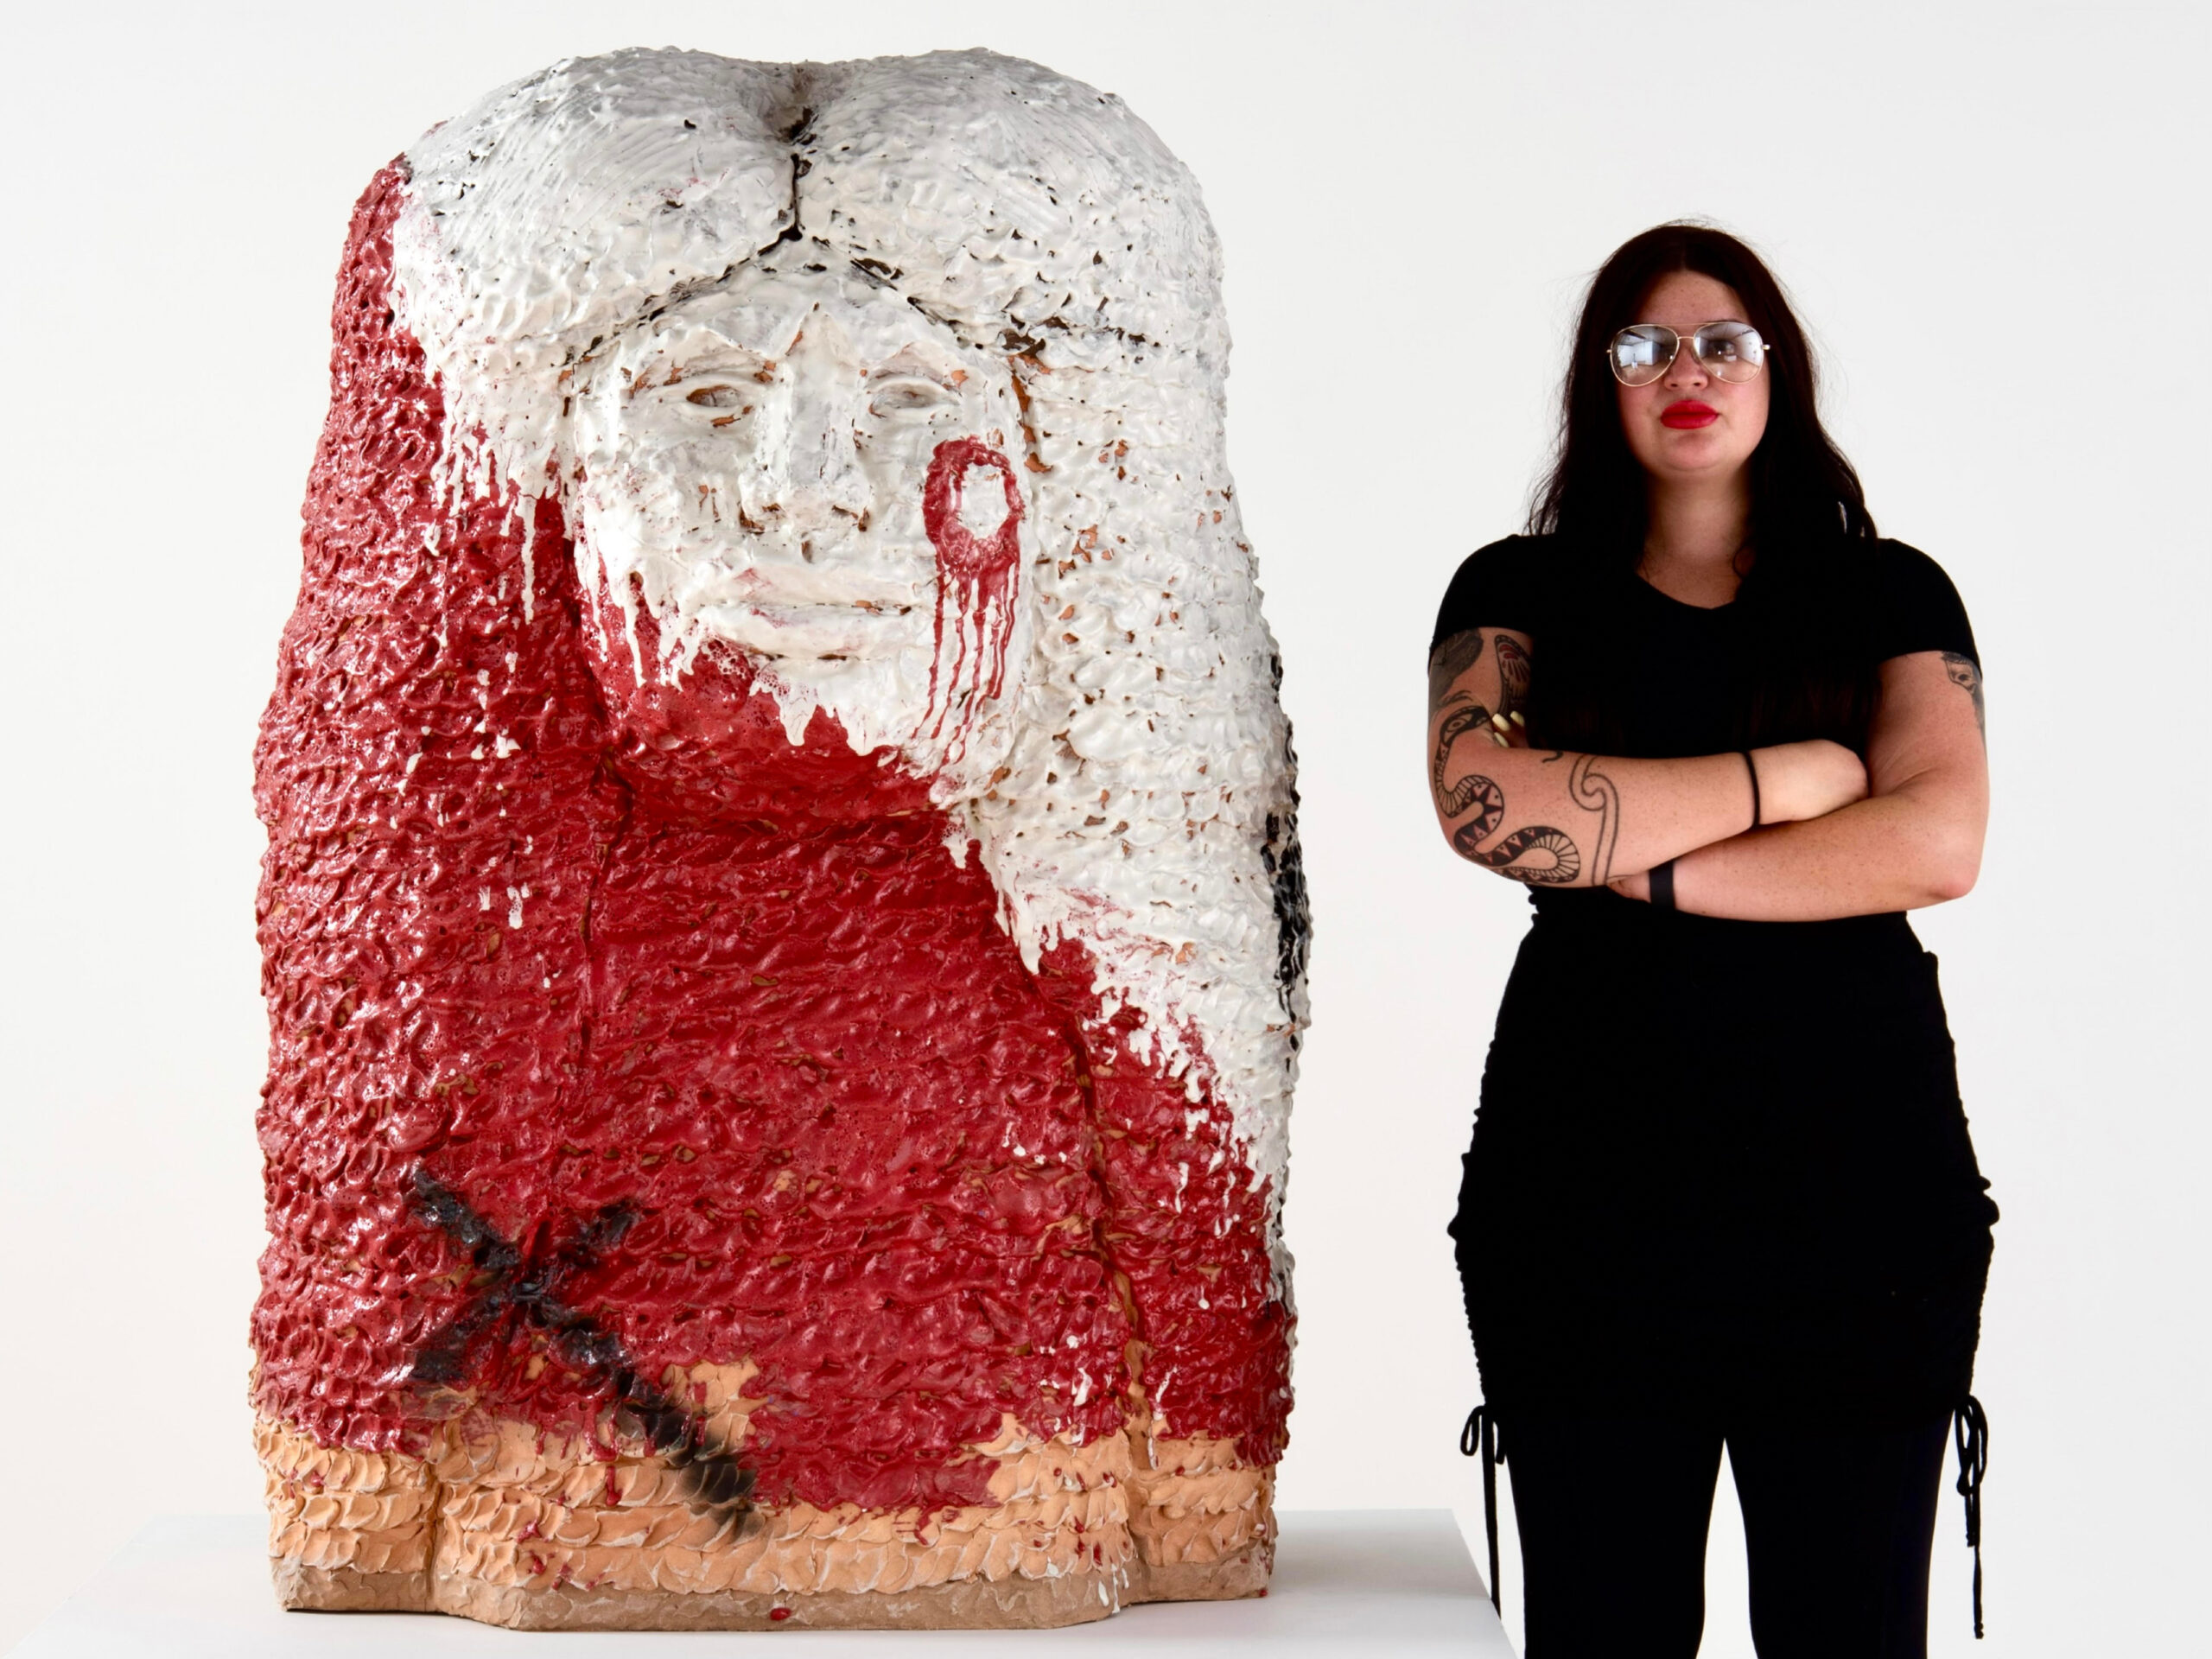 Photo of Raven Halfmoon wearing a black shirt and pants standing next to a large-scale ceramic sculpture of a head with long hair and blood-reed glaze and a black cross.